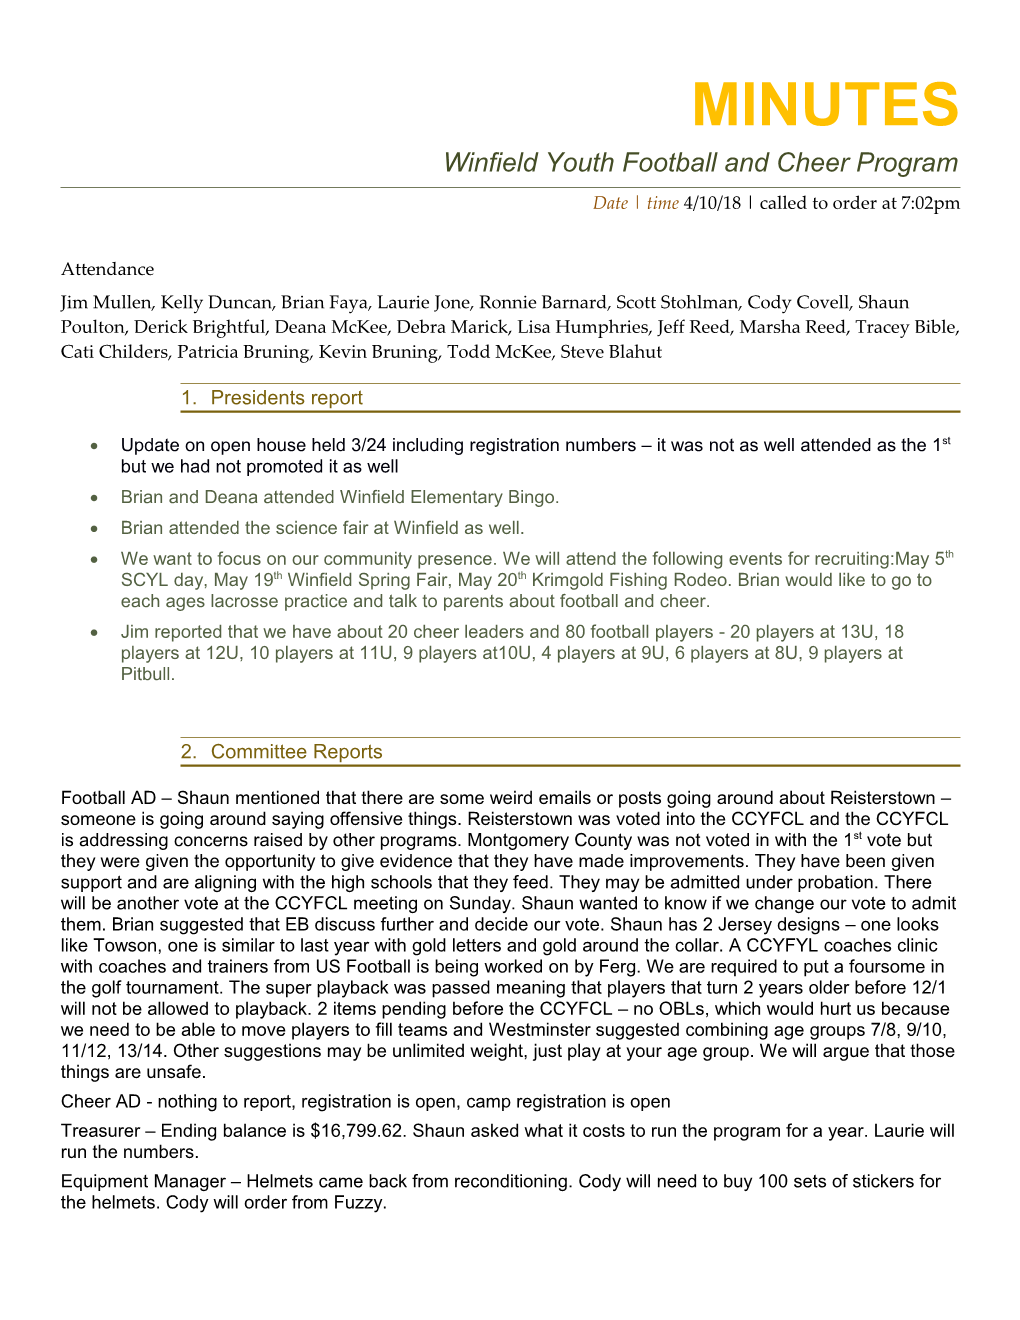 Winfield Youth Football and Cheer Program